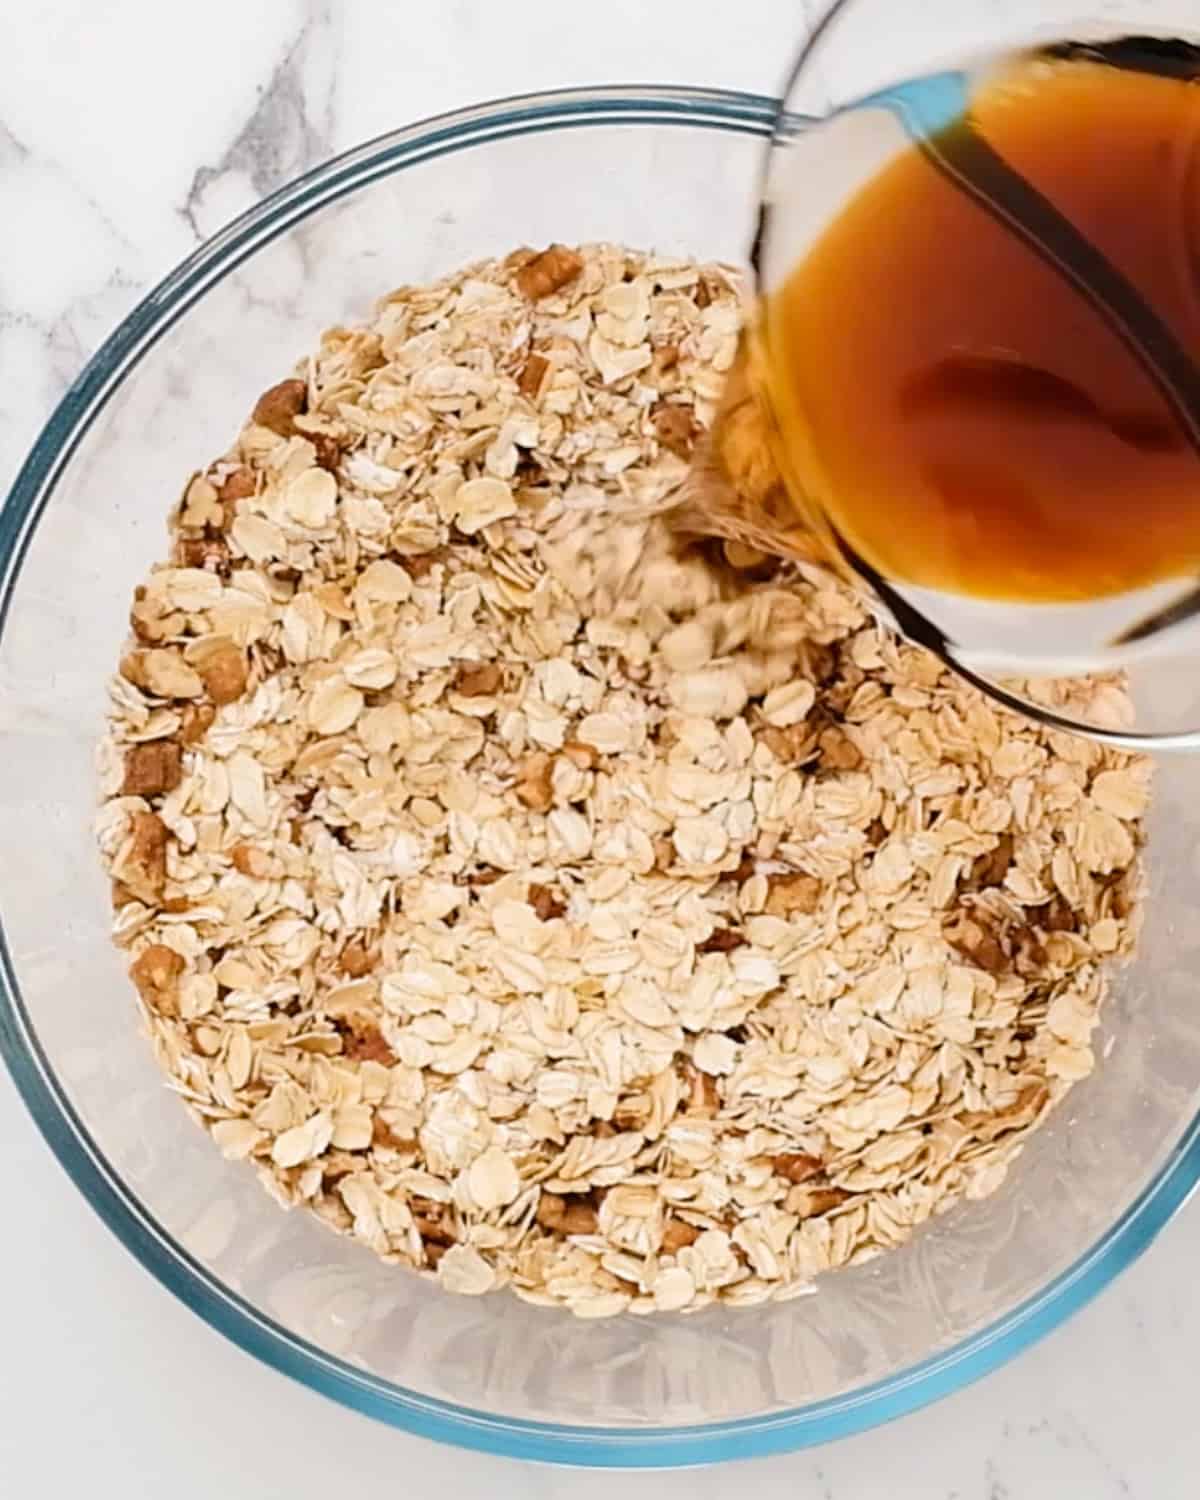 How to Make Homemade Granola - pouring wet ingredients into dry ingredients in a bowl